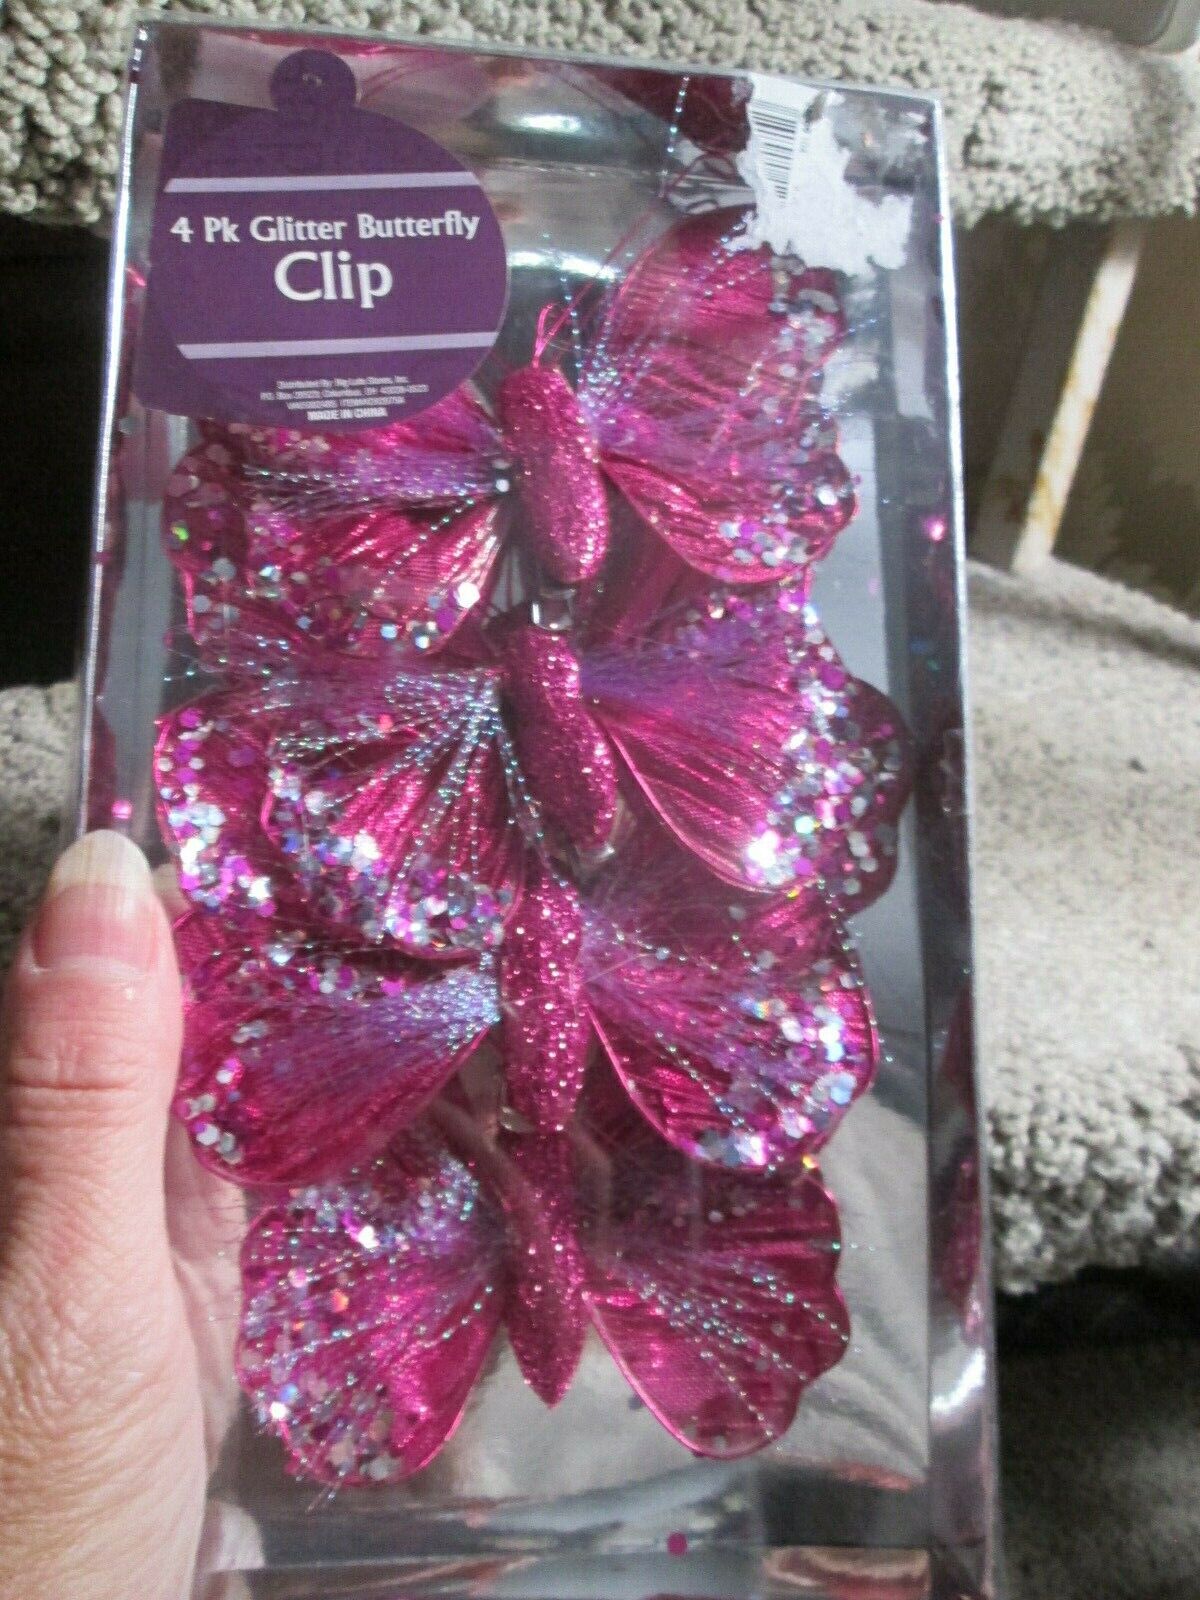 HOT PINK BUTTERFLY HOLIDAY GARDEN GLITTER CLIP ON BOX 4 ORNAMENT MOTH CHRISTMAS 